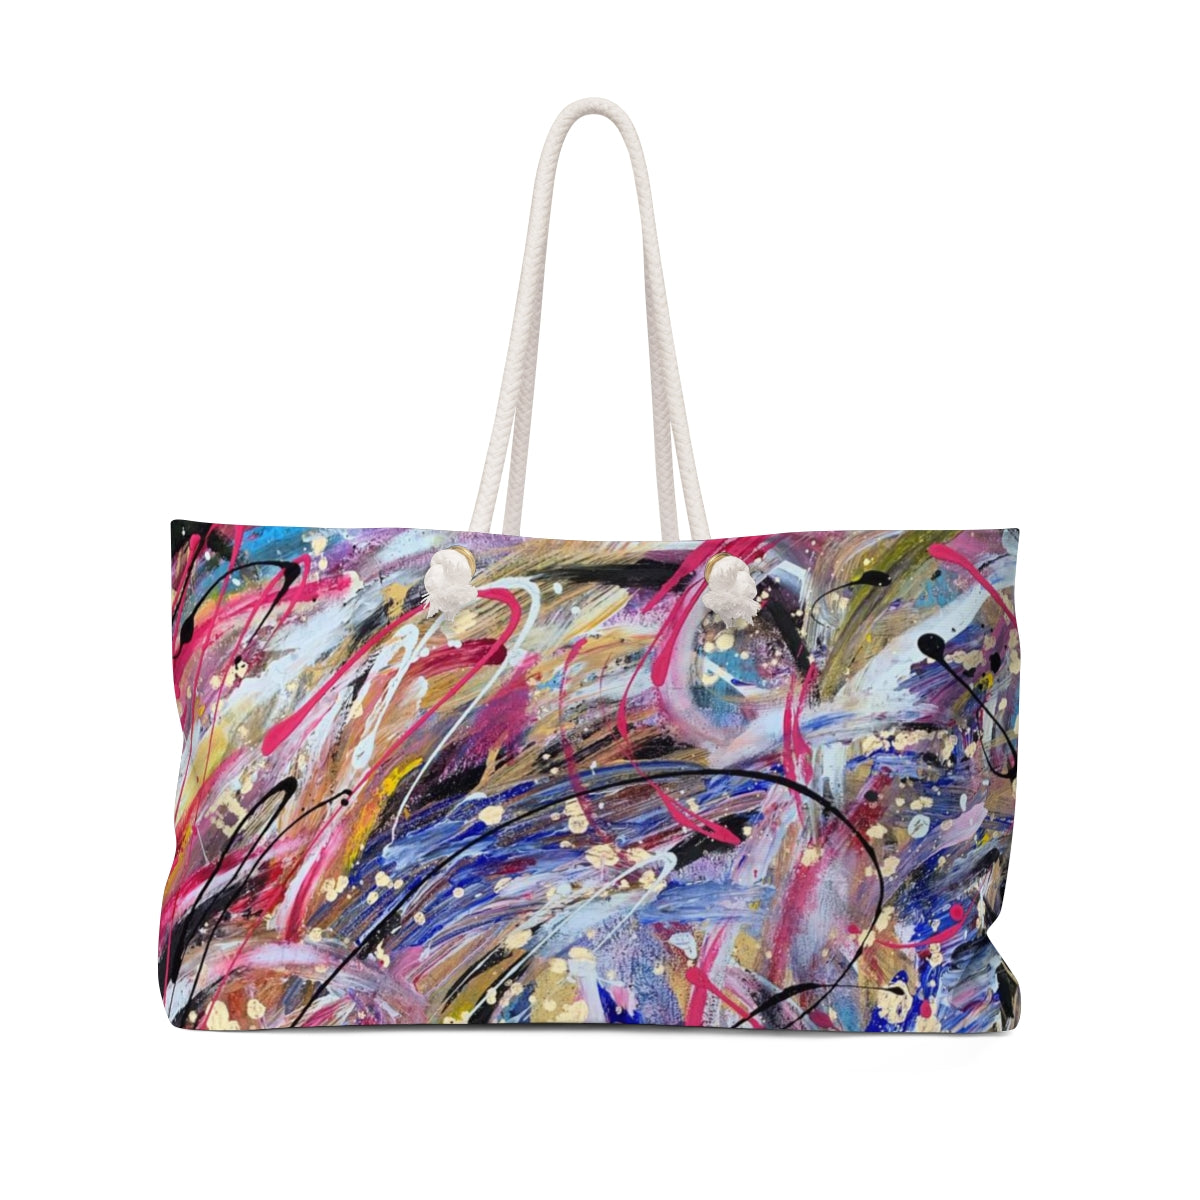 "Maybe Alchemy is a Bubbly Jumble" Weekender Bag